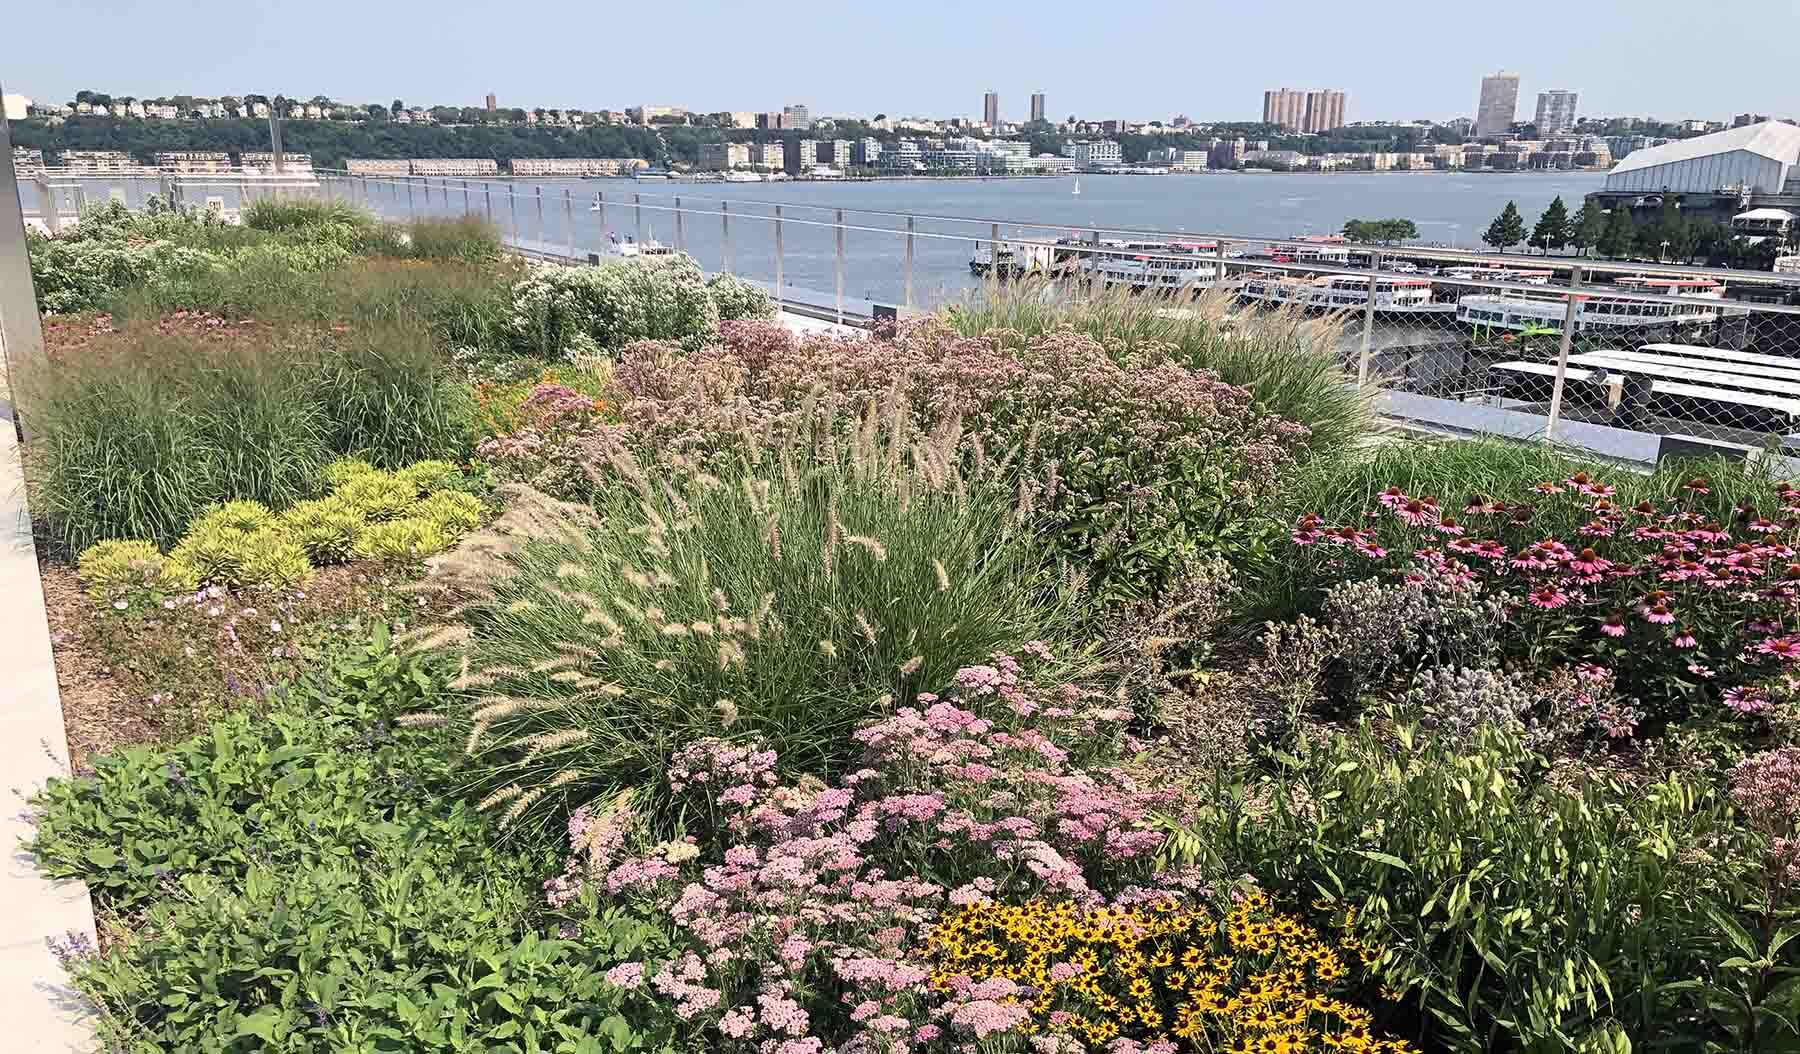 Native planting areas on the Javits Center green roof include pollinator- and bird-friendly species, such as Purple Coneflower and Joe-Pye Weed. Photo: Javits Center